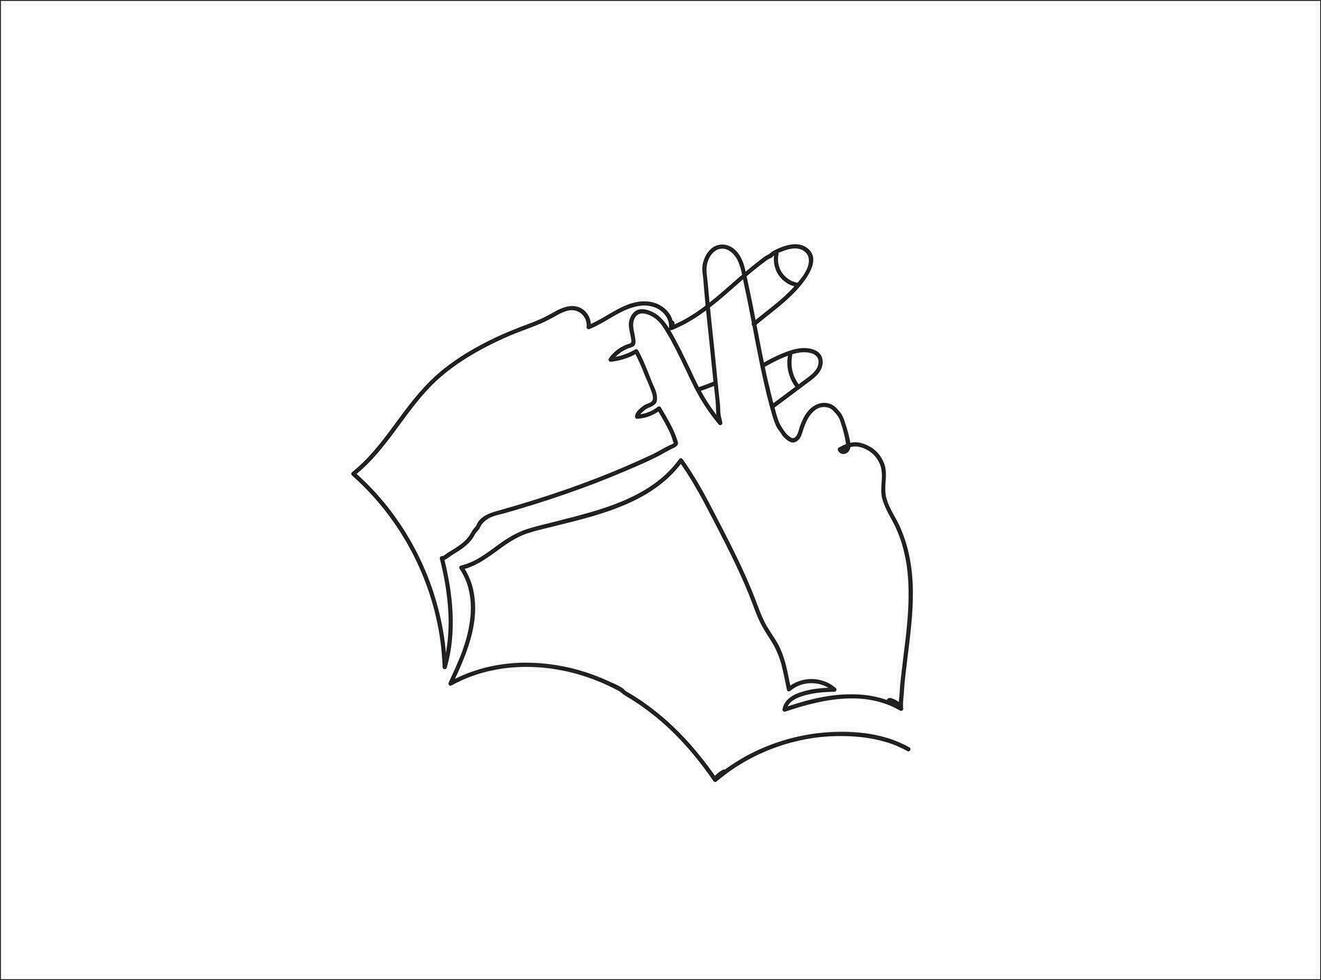 A handmaking a hashtag line drawing vector